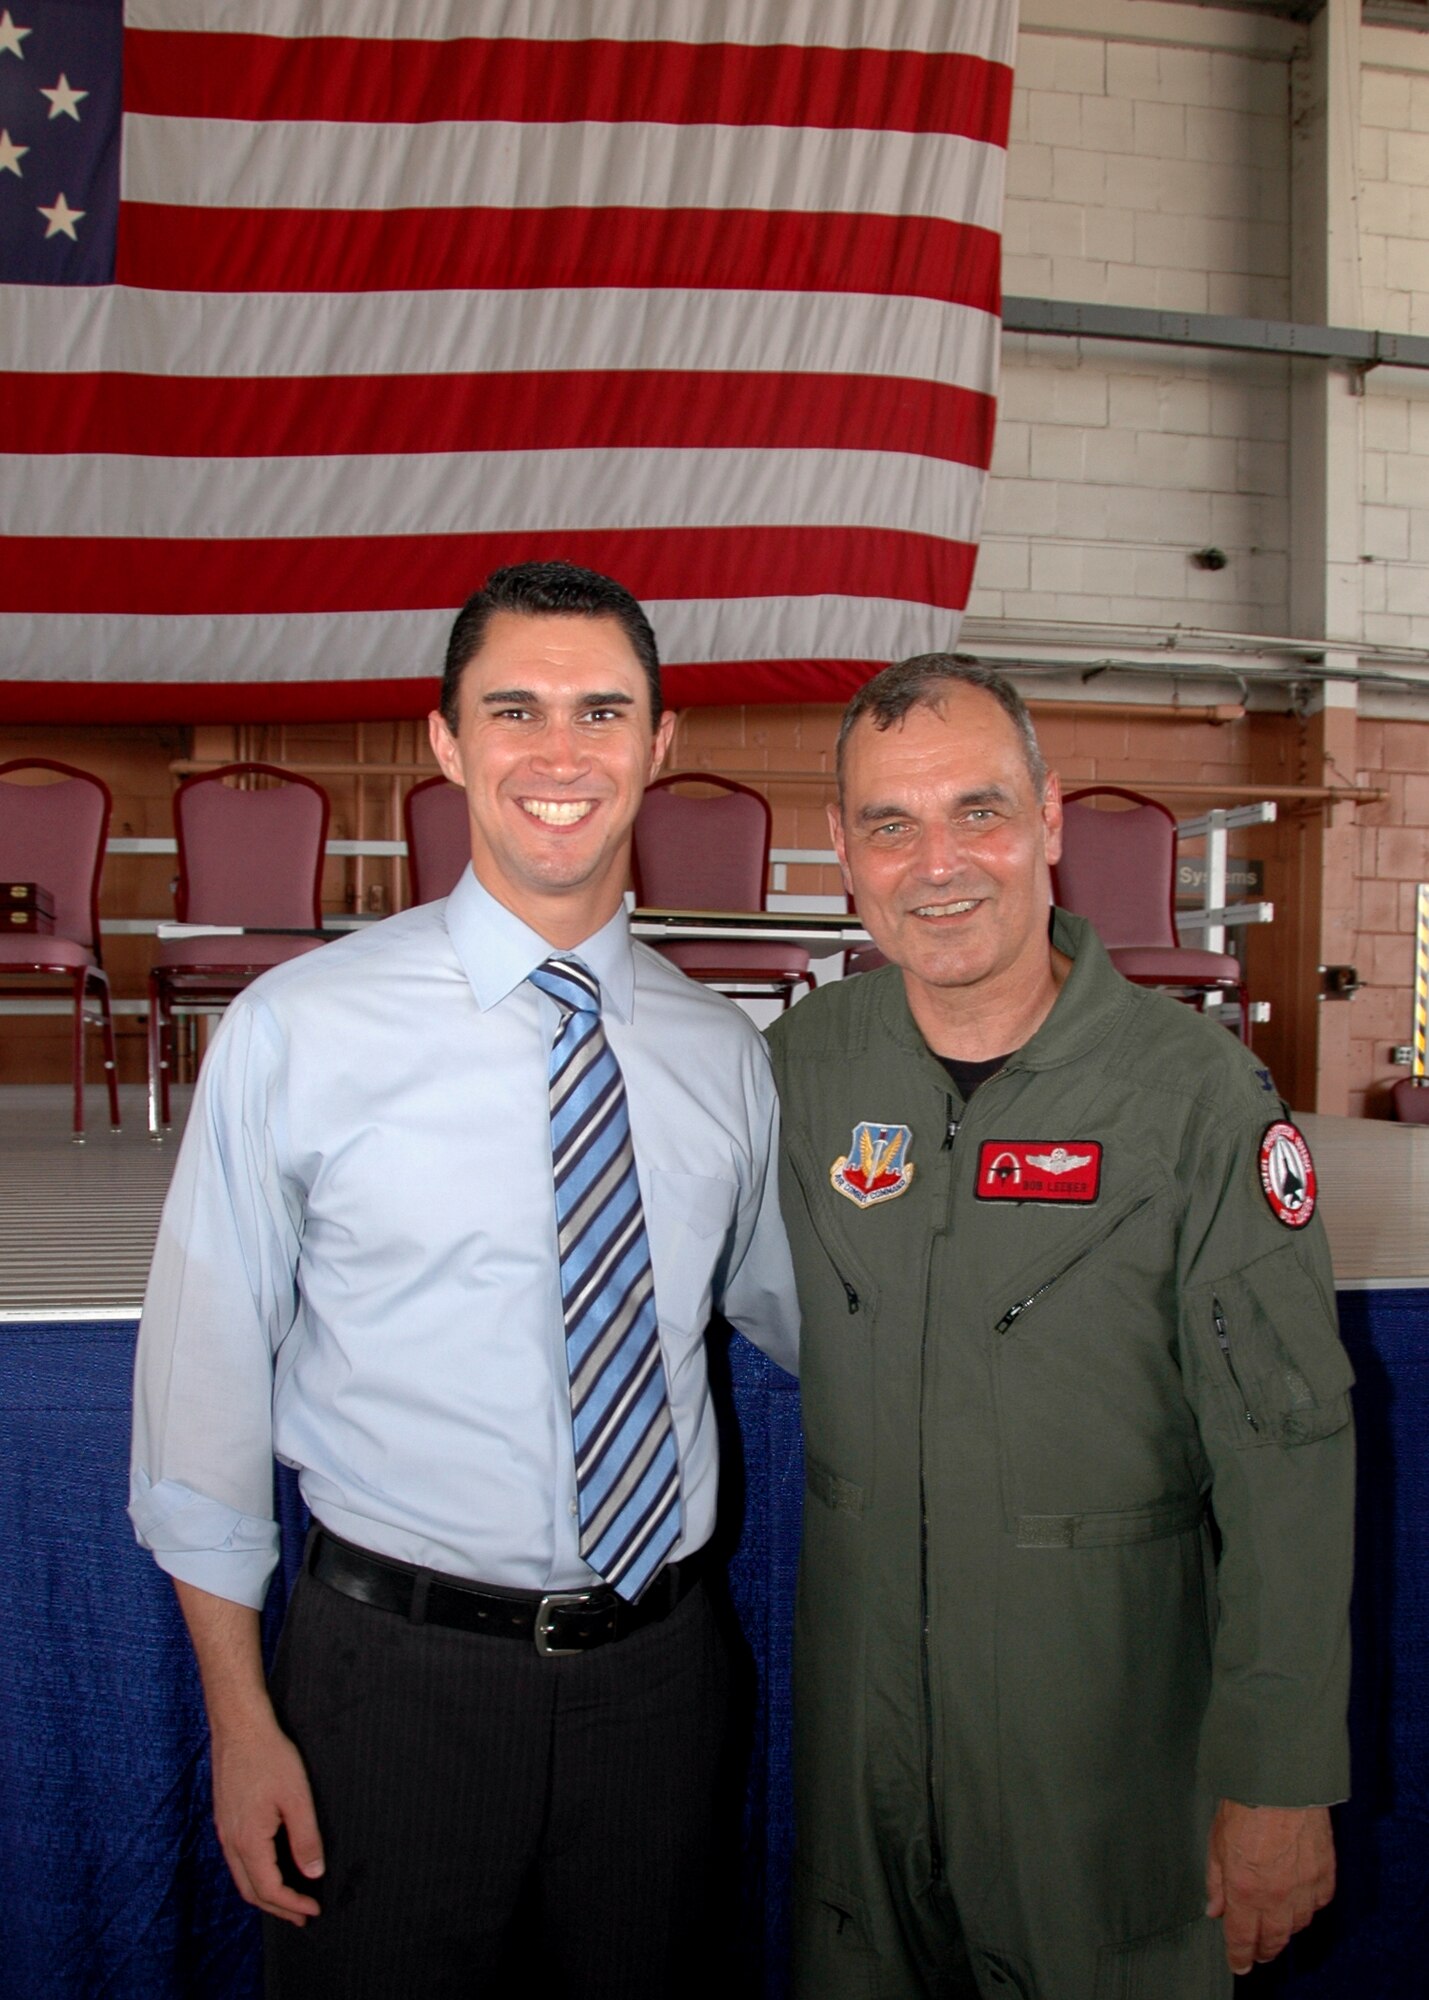 Mr. Michael Dubois and Col Robert Leeker take time out for a photograph during the end of era ceremony at the 131st Fighter Wing June 13, 2009. Mr. Dubois is the leglestative asistant to the U.S. Senator of Missouri Christopher Bond.